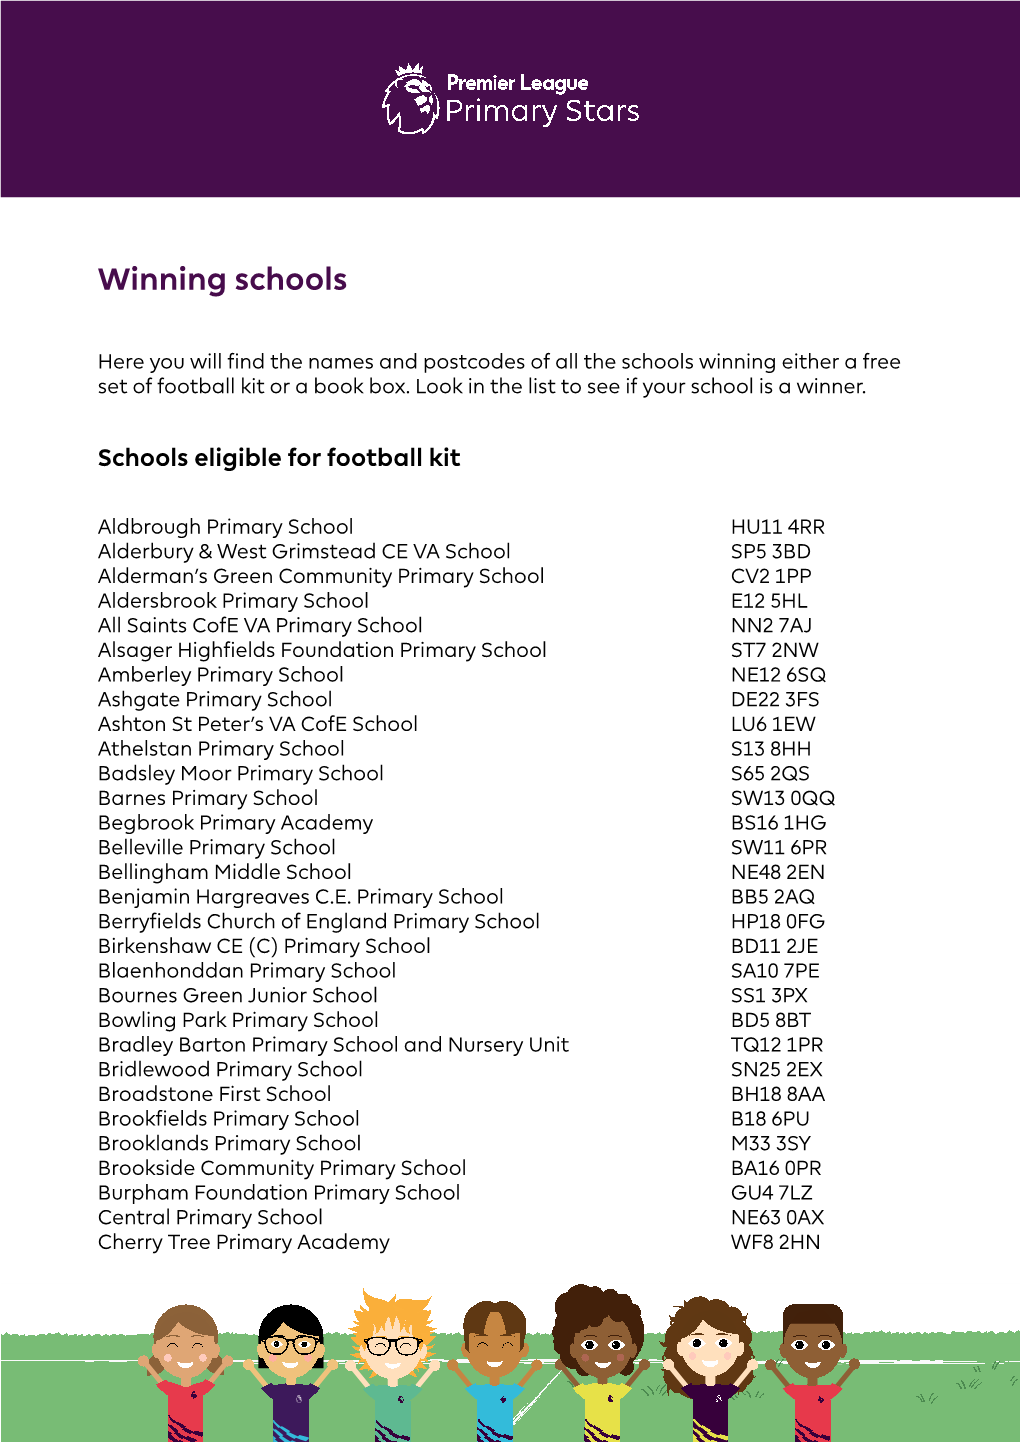 Download the List of Schools Winning Football Kit Or Book Boxes